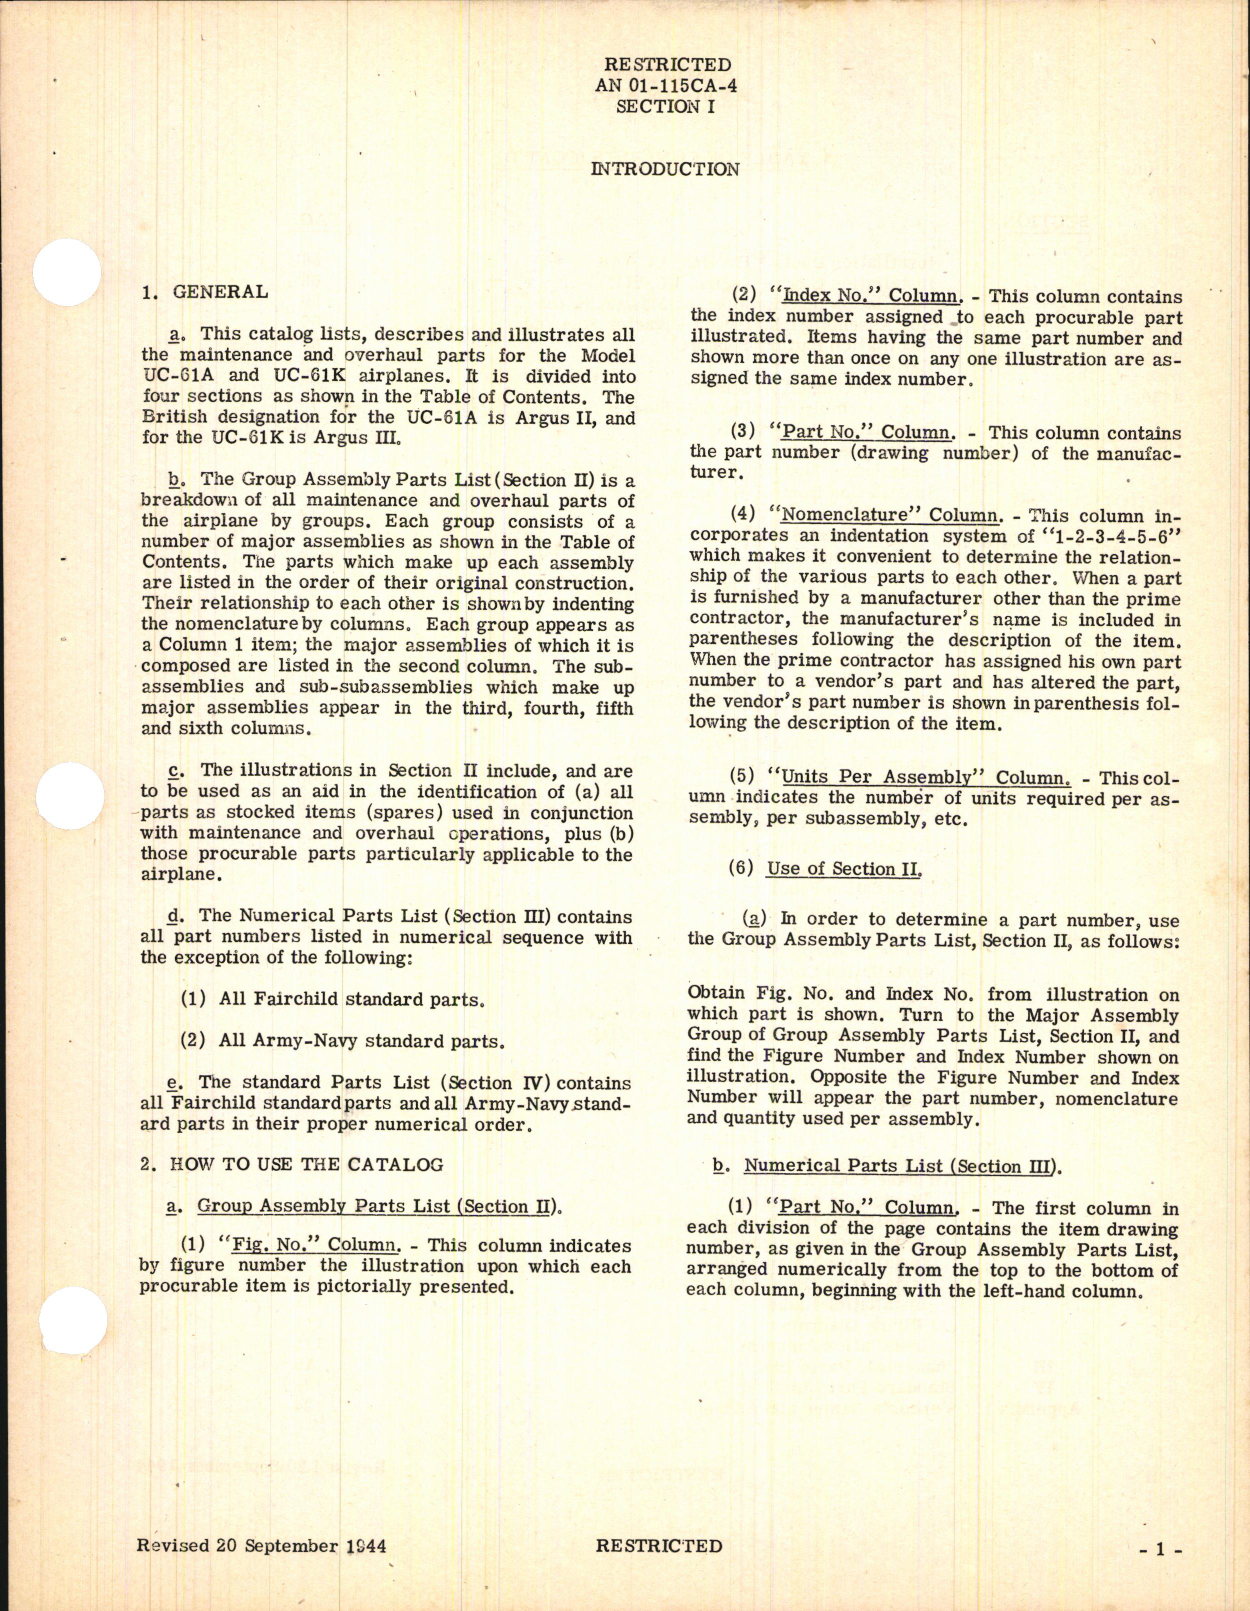 Sample page 5 from AirCorps Library document: Airplane Parts Catalog for UC-61A and UC-61K